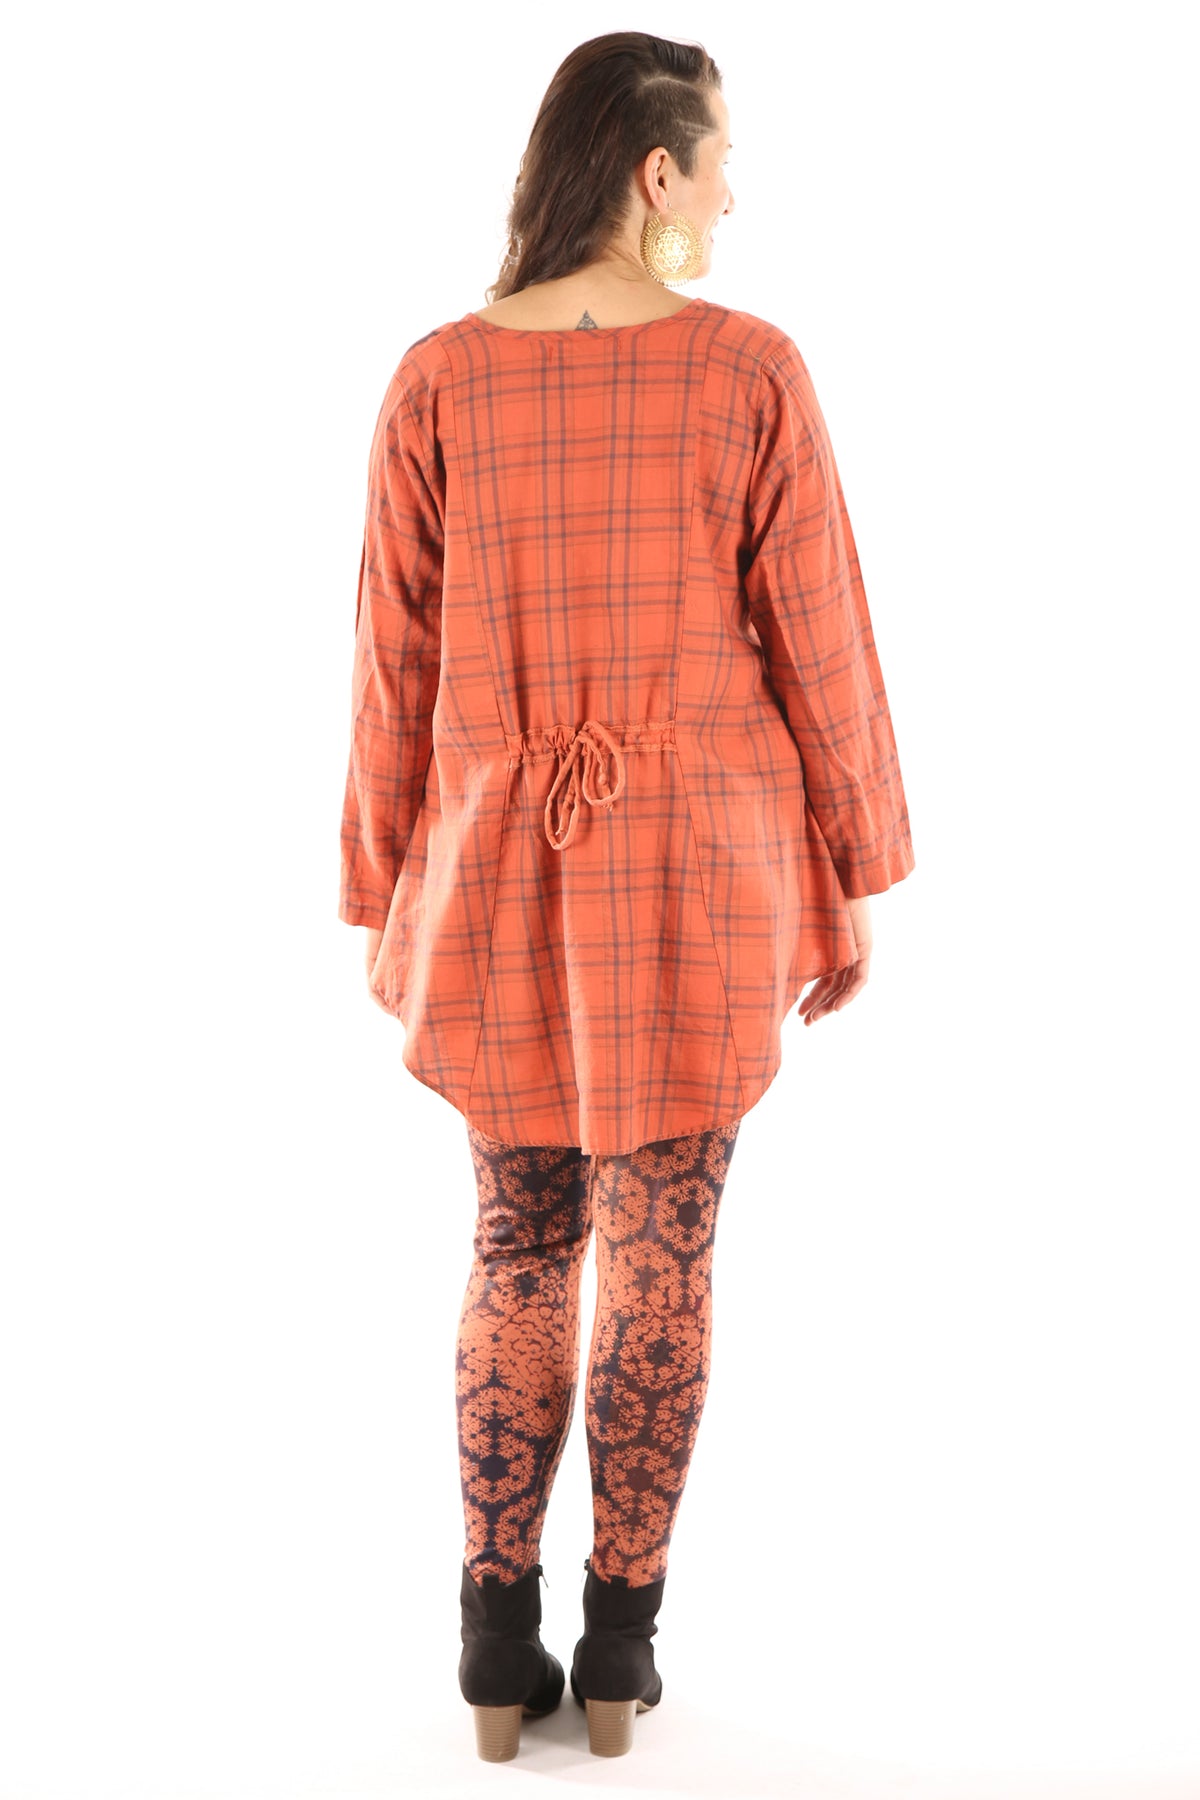 2276 Plaid Bliss Top Persimmon-P